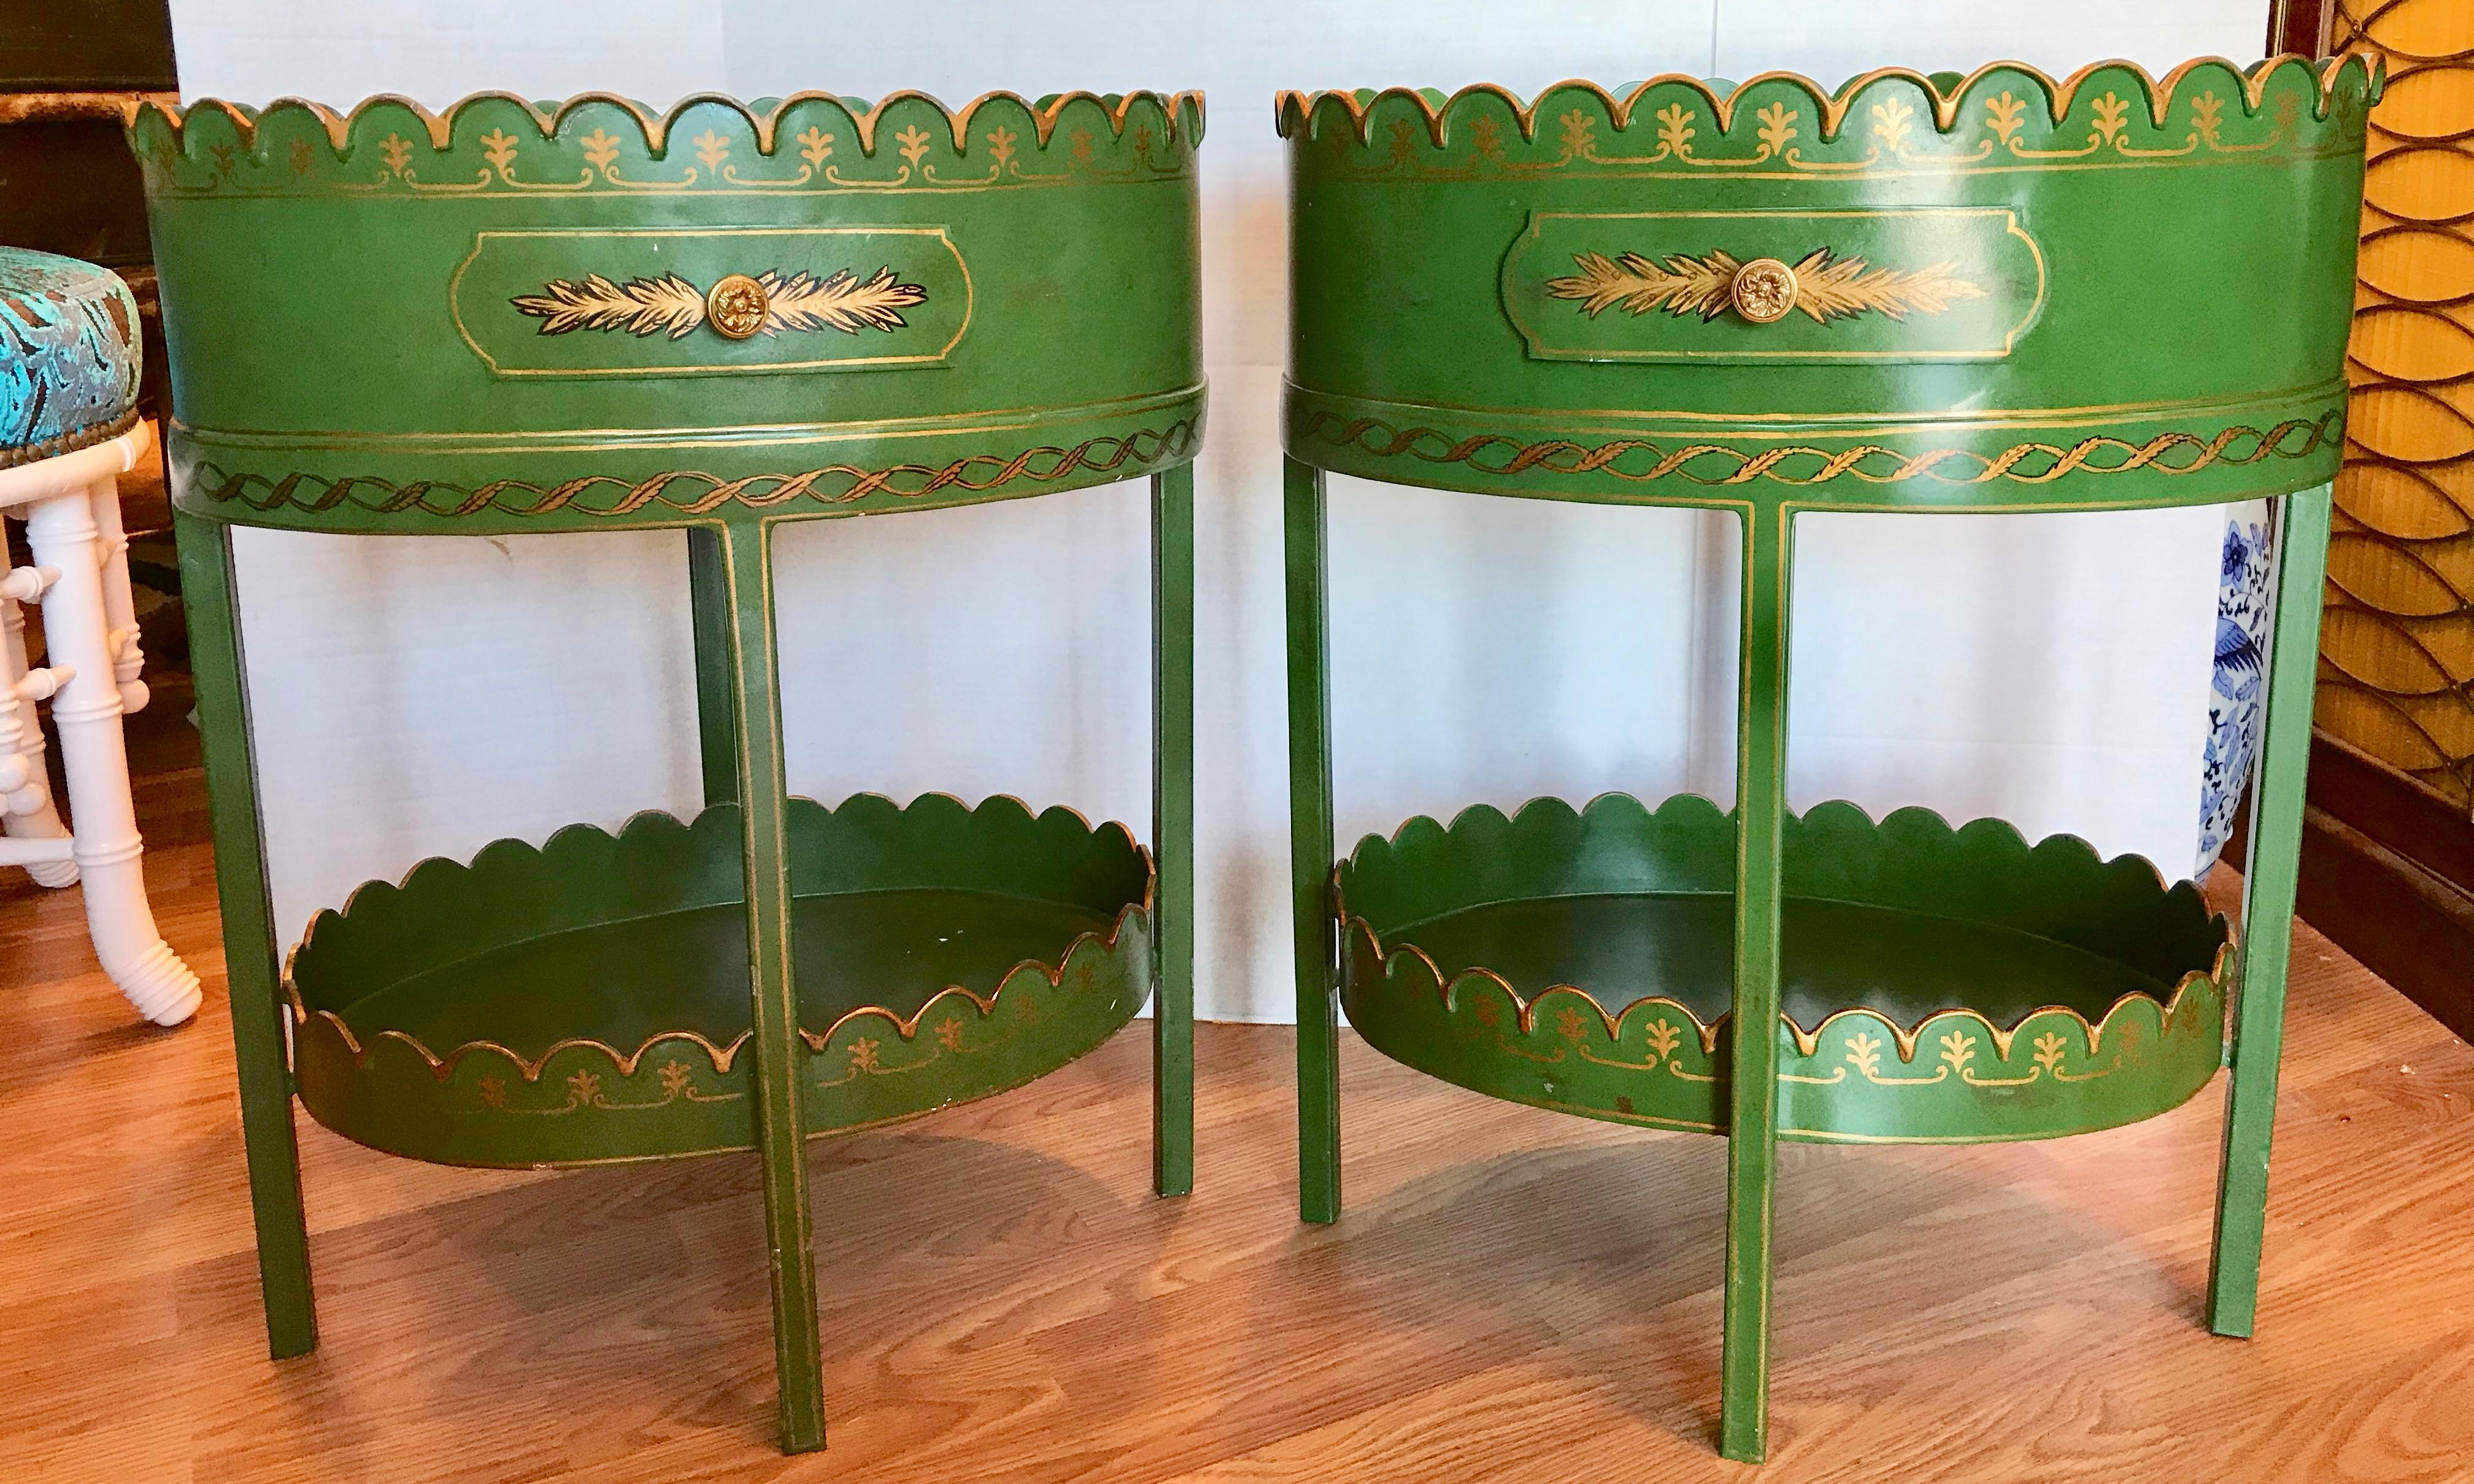 A rare pair - great scale and style, with a soft
green color. The chairs are accented with gilt 
wreaths and bows in the Classic French manner.
Outstanding drink or side tables - each fitted with
a single drawer. Both stunning and